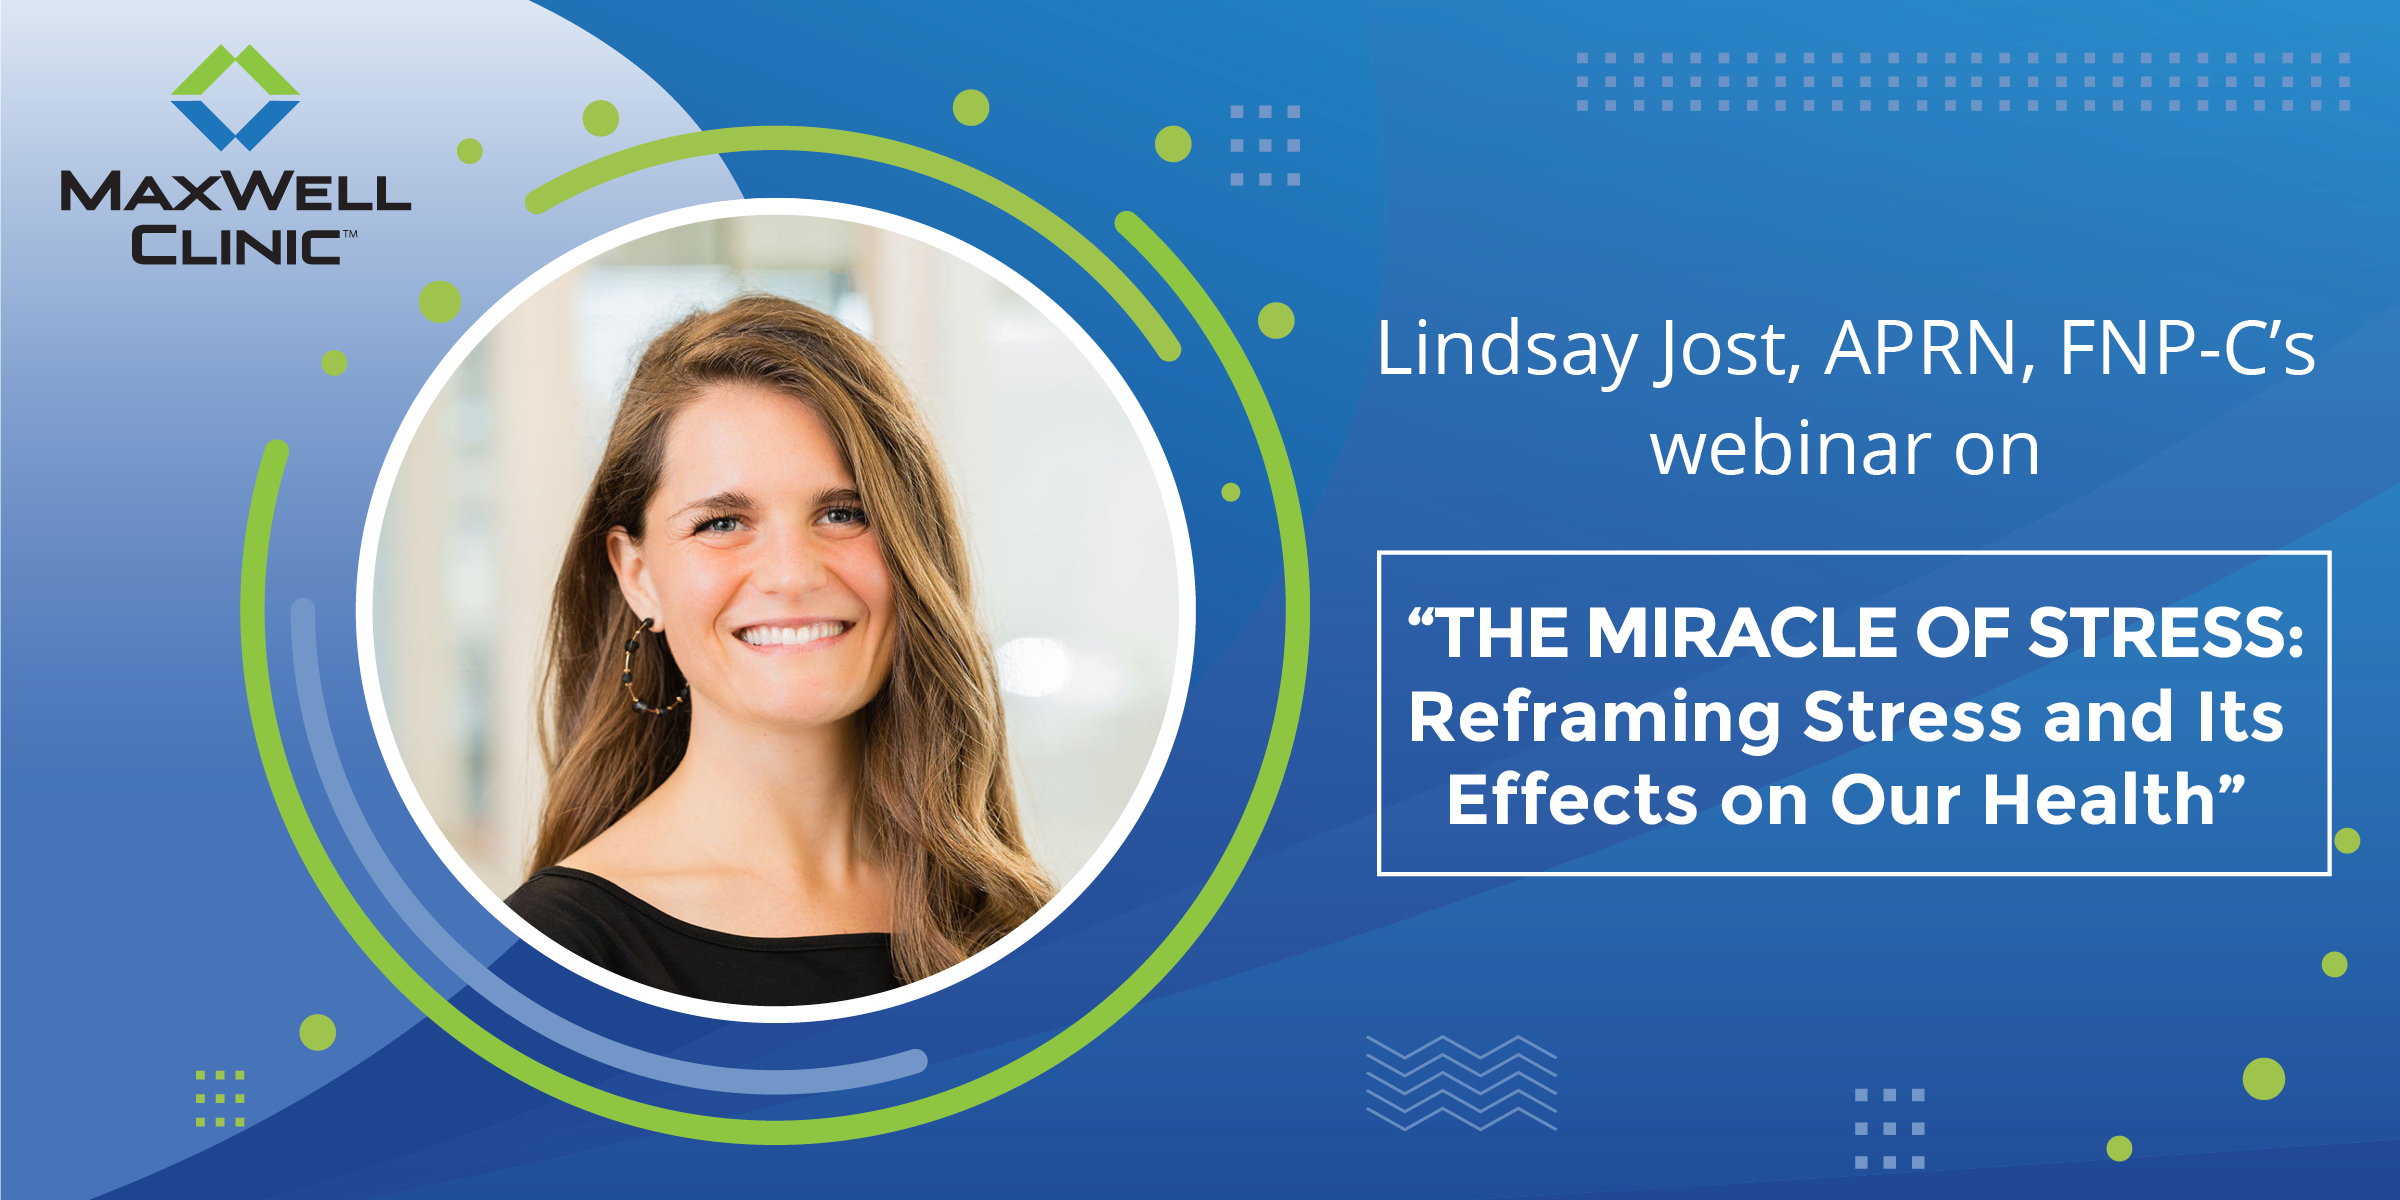 The Miracle of Stress: Reframing Stress & Its Effects on Our Health with Lindsay Jost, APRN, FNP-C